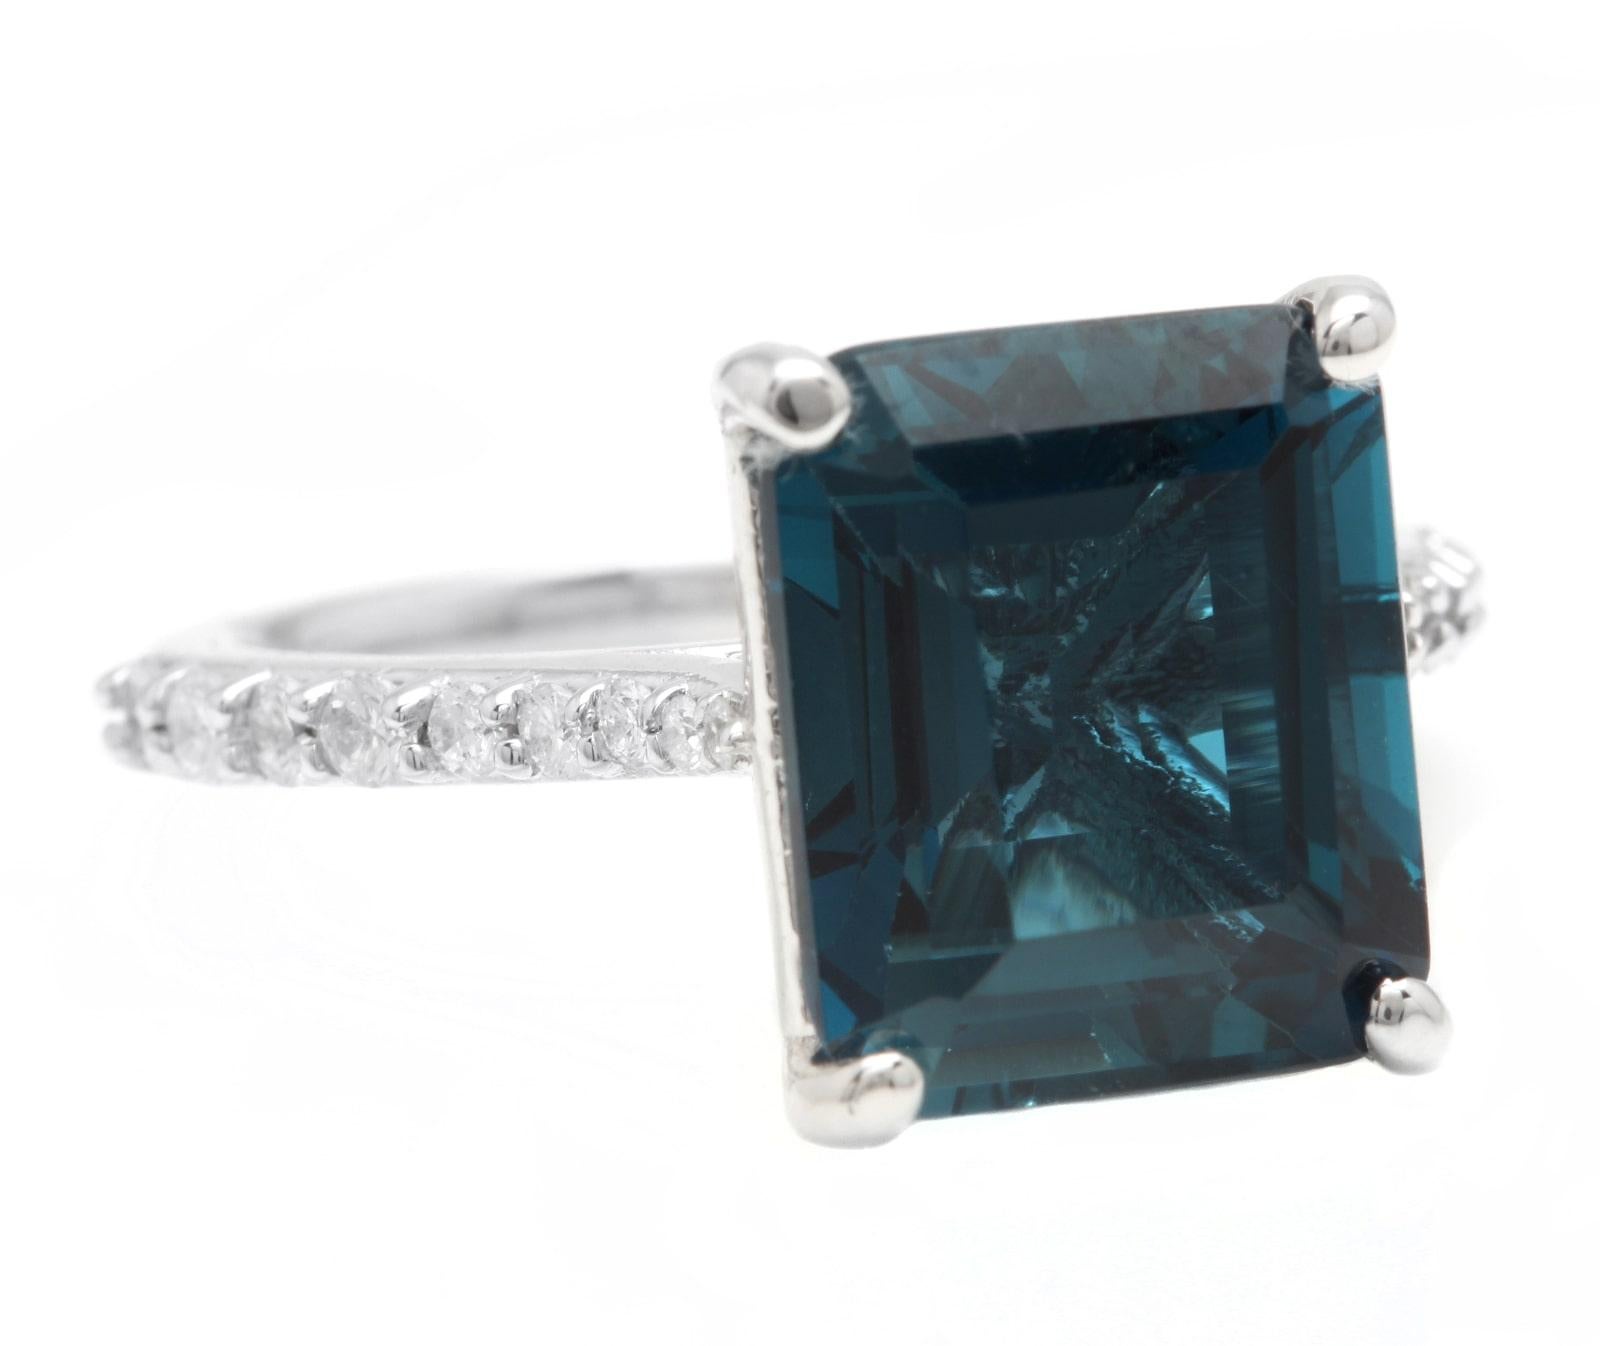 7.90 Carats Natural  Impressive London Blue Topaz and Diamond 14K White Gold Ring

Suggested Replacement Value $4,000.00

Total Natural London Blue Topaz Weight is: Approx. 7.50 Carats 

 London Blue Topaz Measures: Approx. 12.00 x 10.00mm

Natural